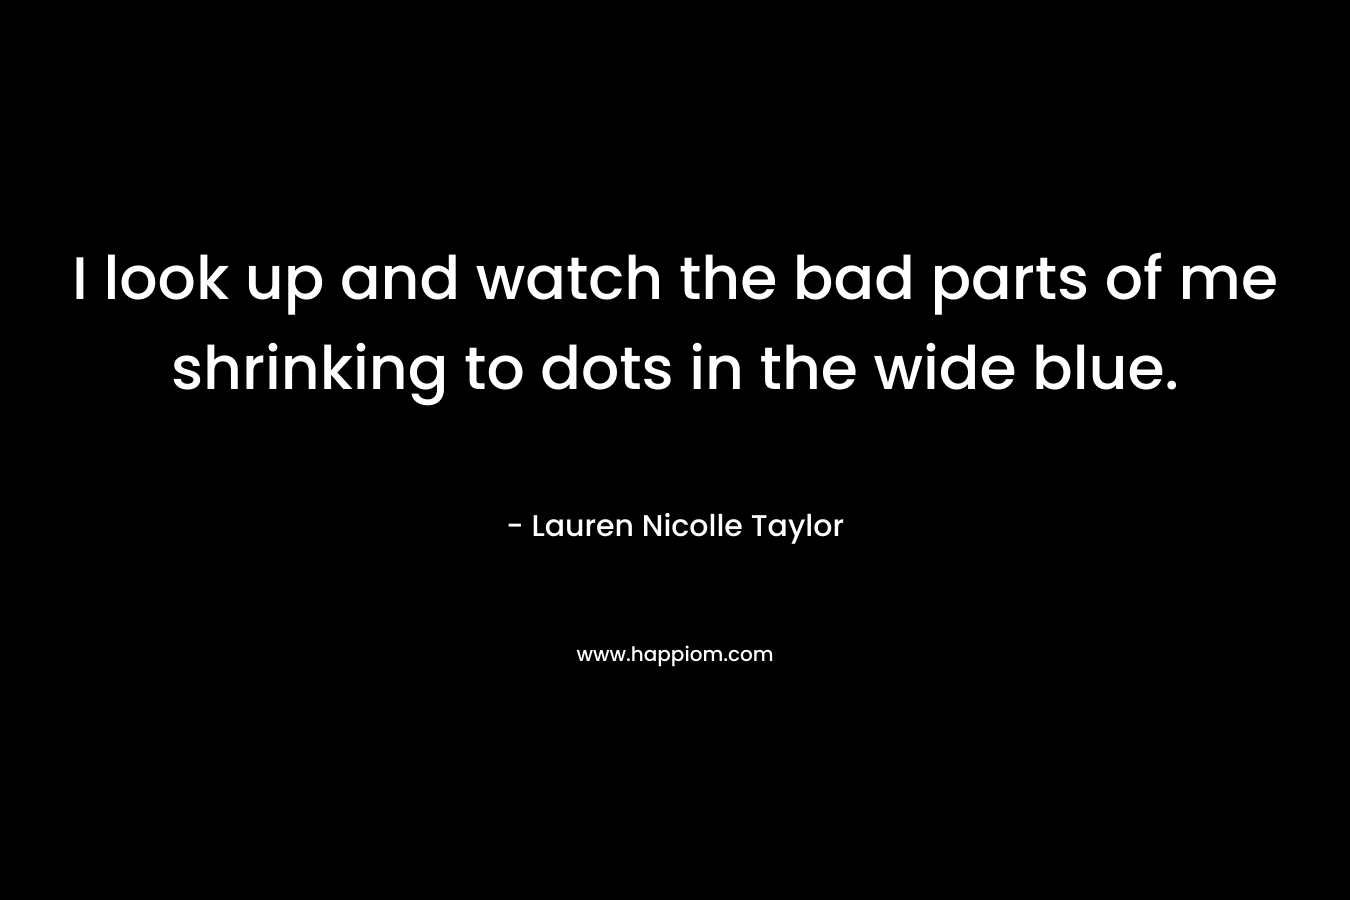 I look up and watch the bad parts of me shrinking to dots in the wide blue. – Lauren Nicolle Taylor